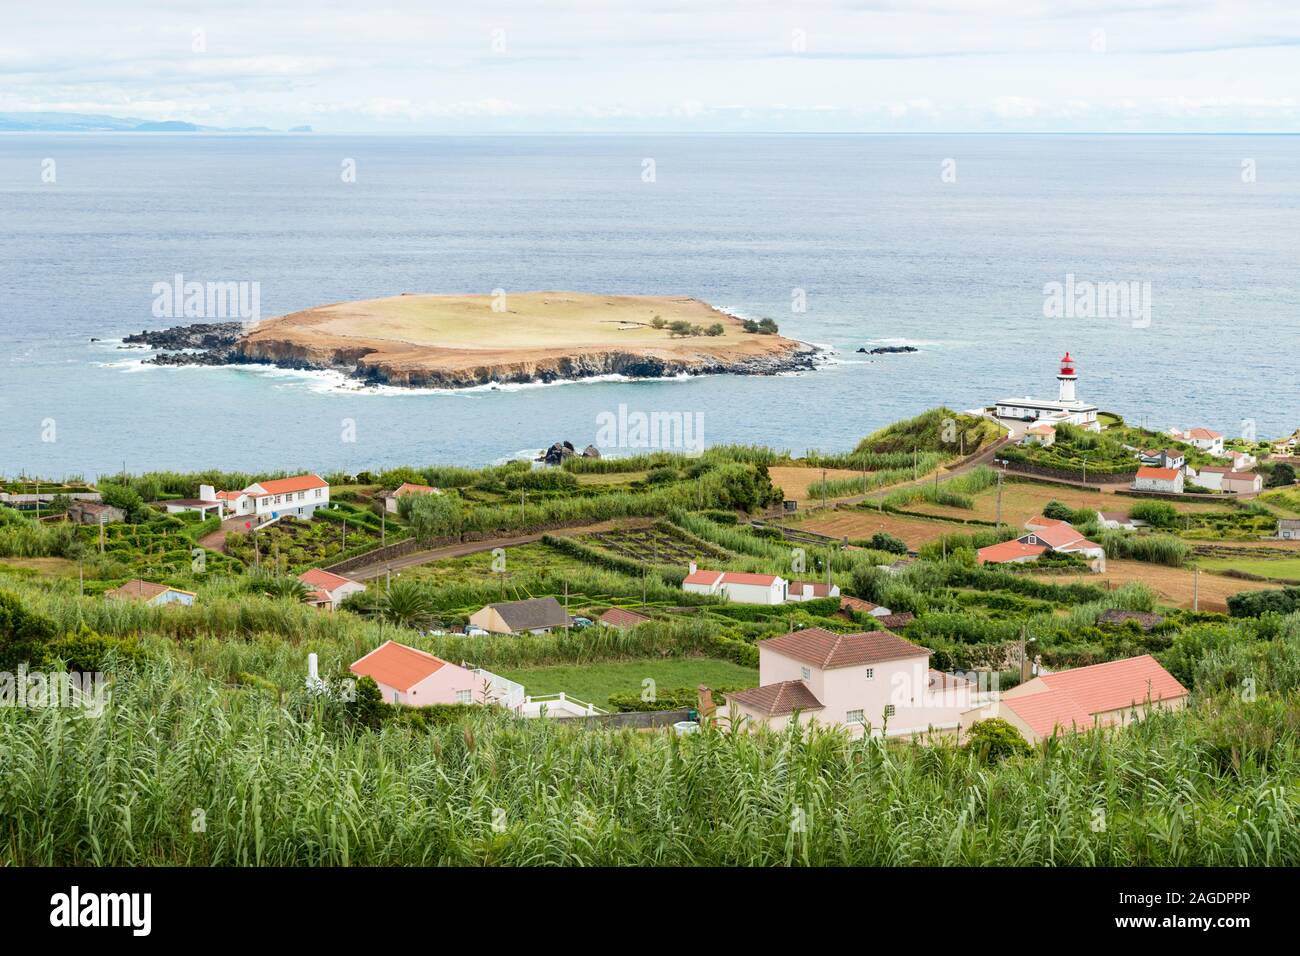 View of the Farol da Ponta do Topo and Ilhéu do Topo which look out over the Atlantic Ocean to the island of Terceira in the Azores archipelago. Stock Photo